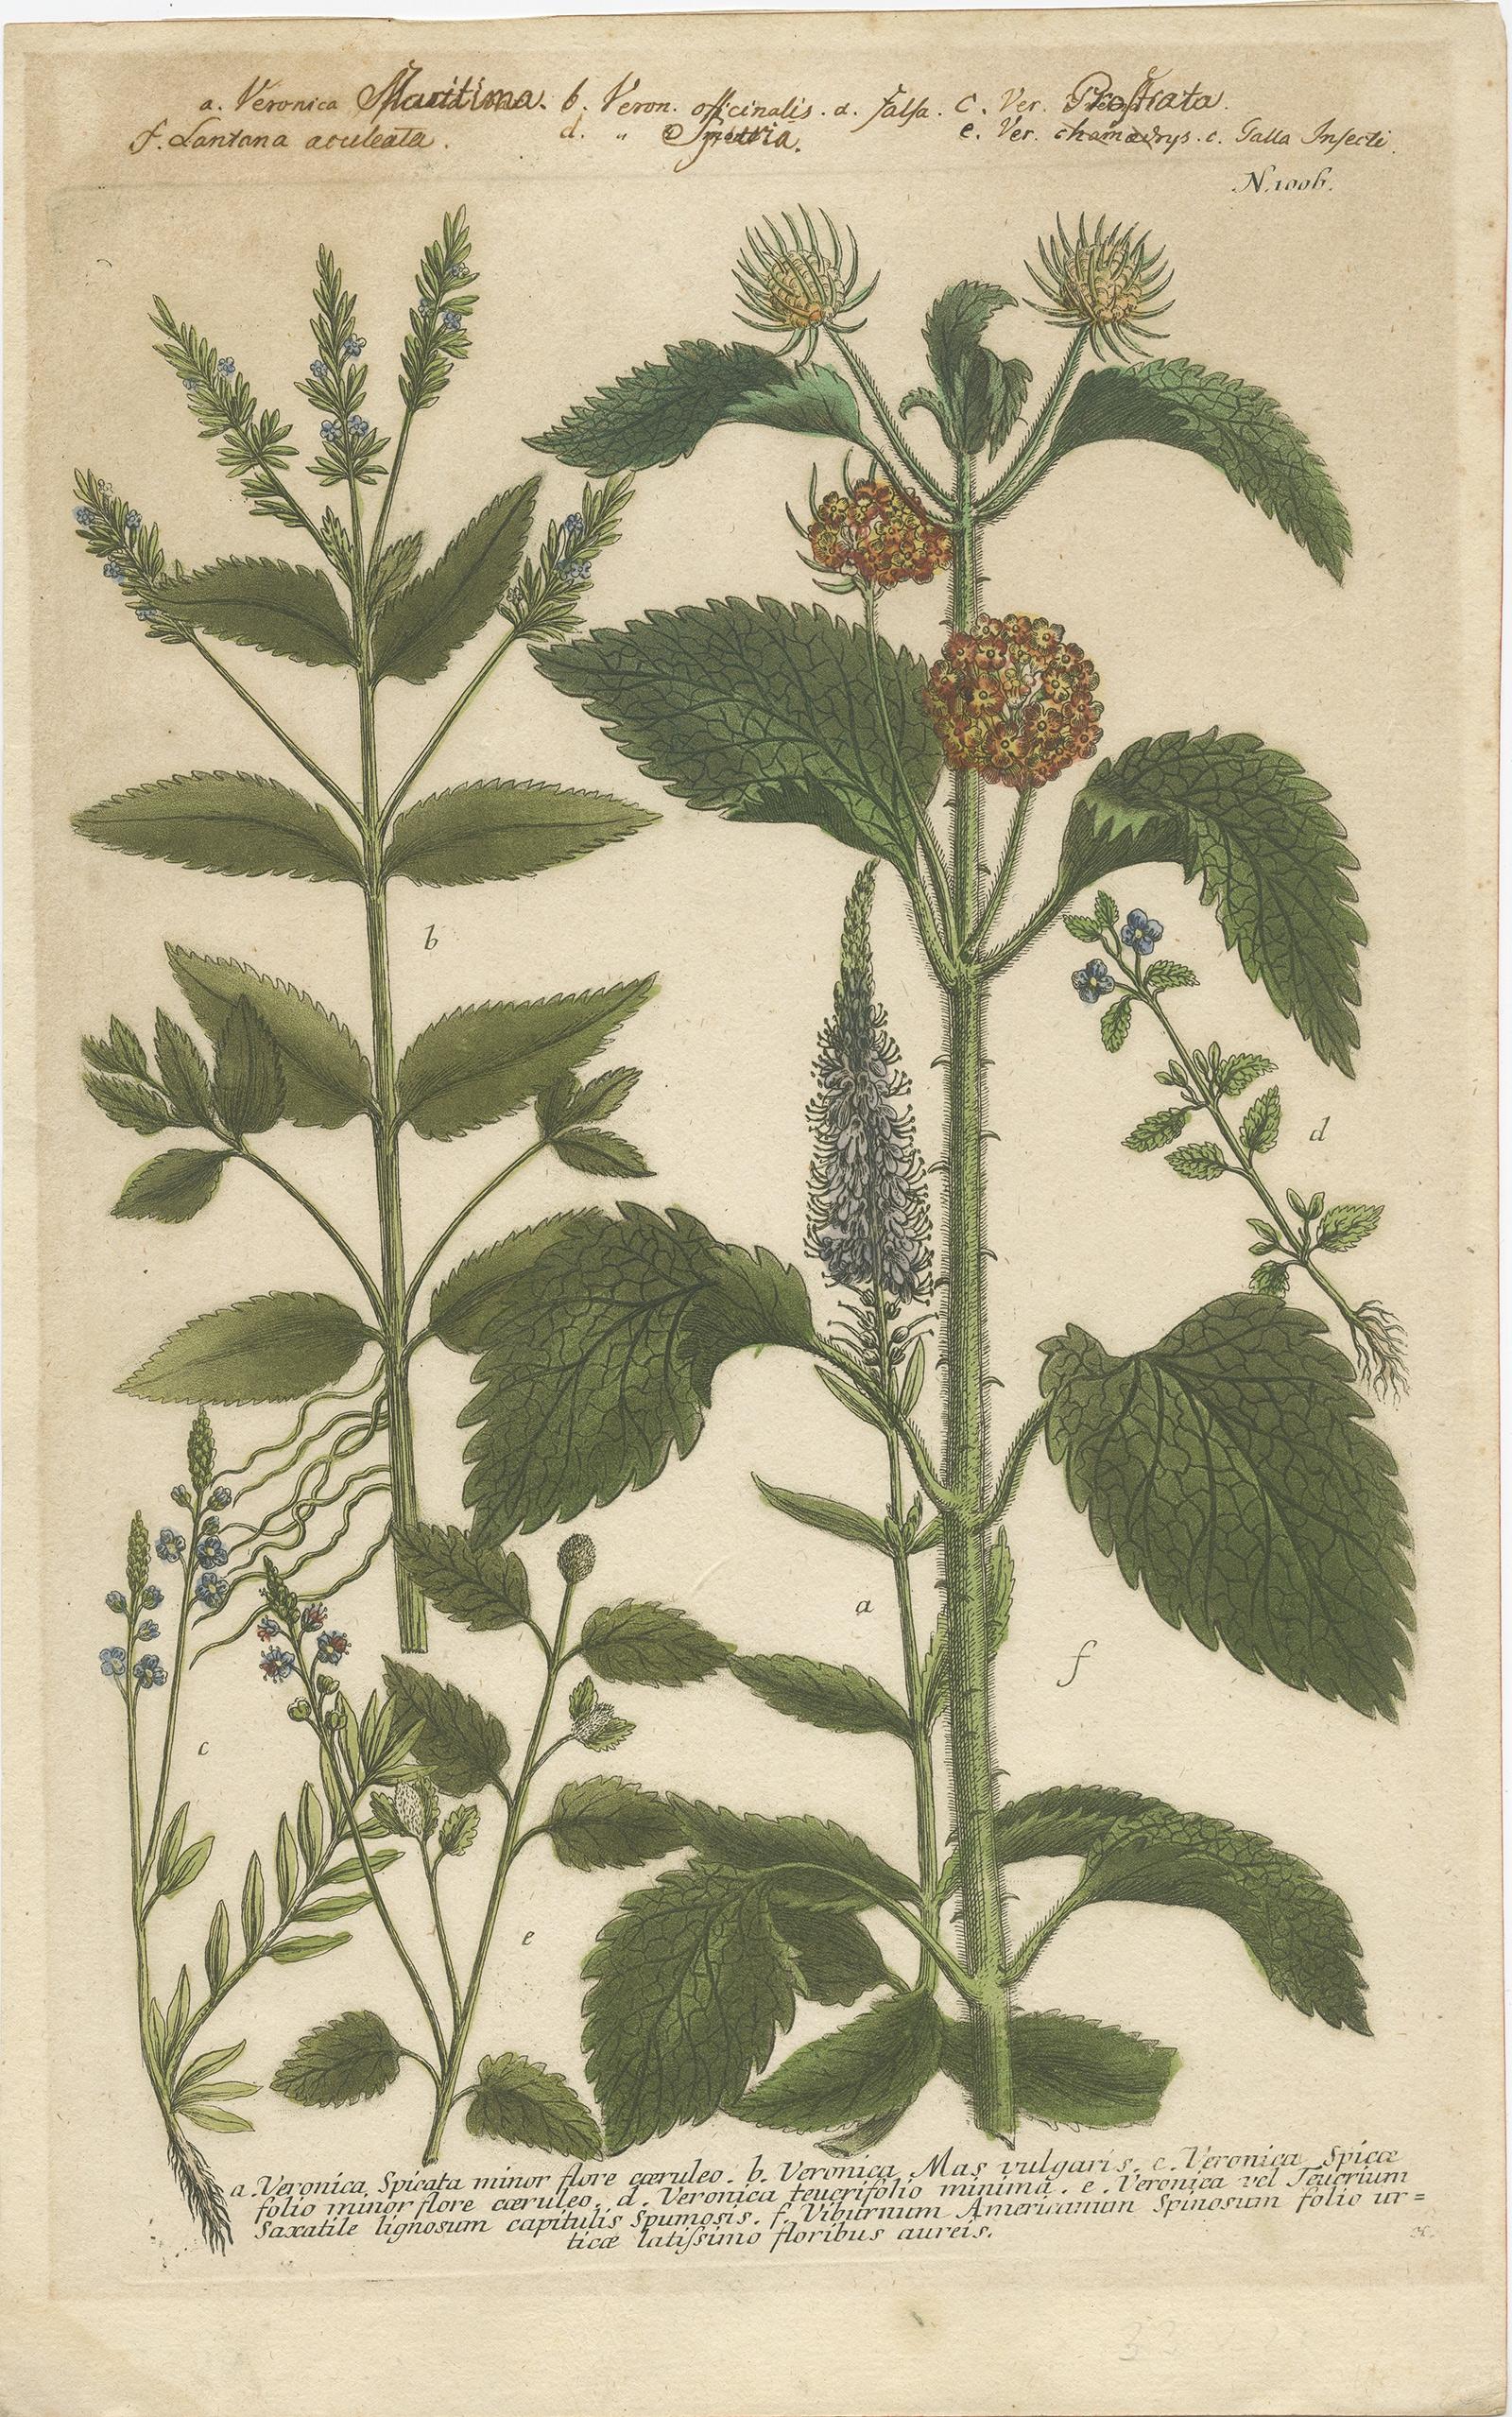 Antique botany print titled 'Veronica Spicata minor (..)'. 

Copper engraving of spike speedwell and various other plants. This print originates from 'Phytanthoza Iconographia' by J.W. Weinmann.

Artists and Engravers: Johann Wilhelm Weinmann,